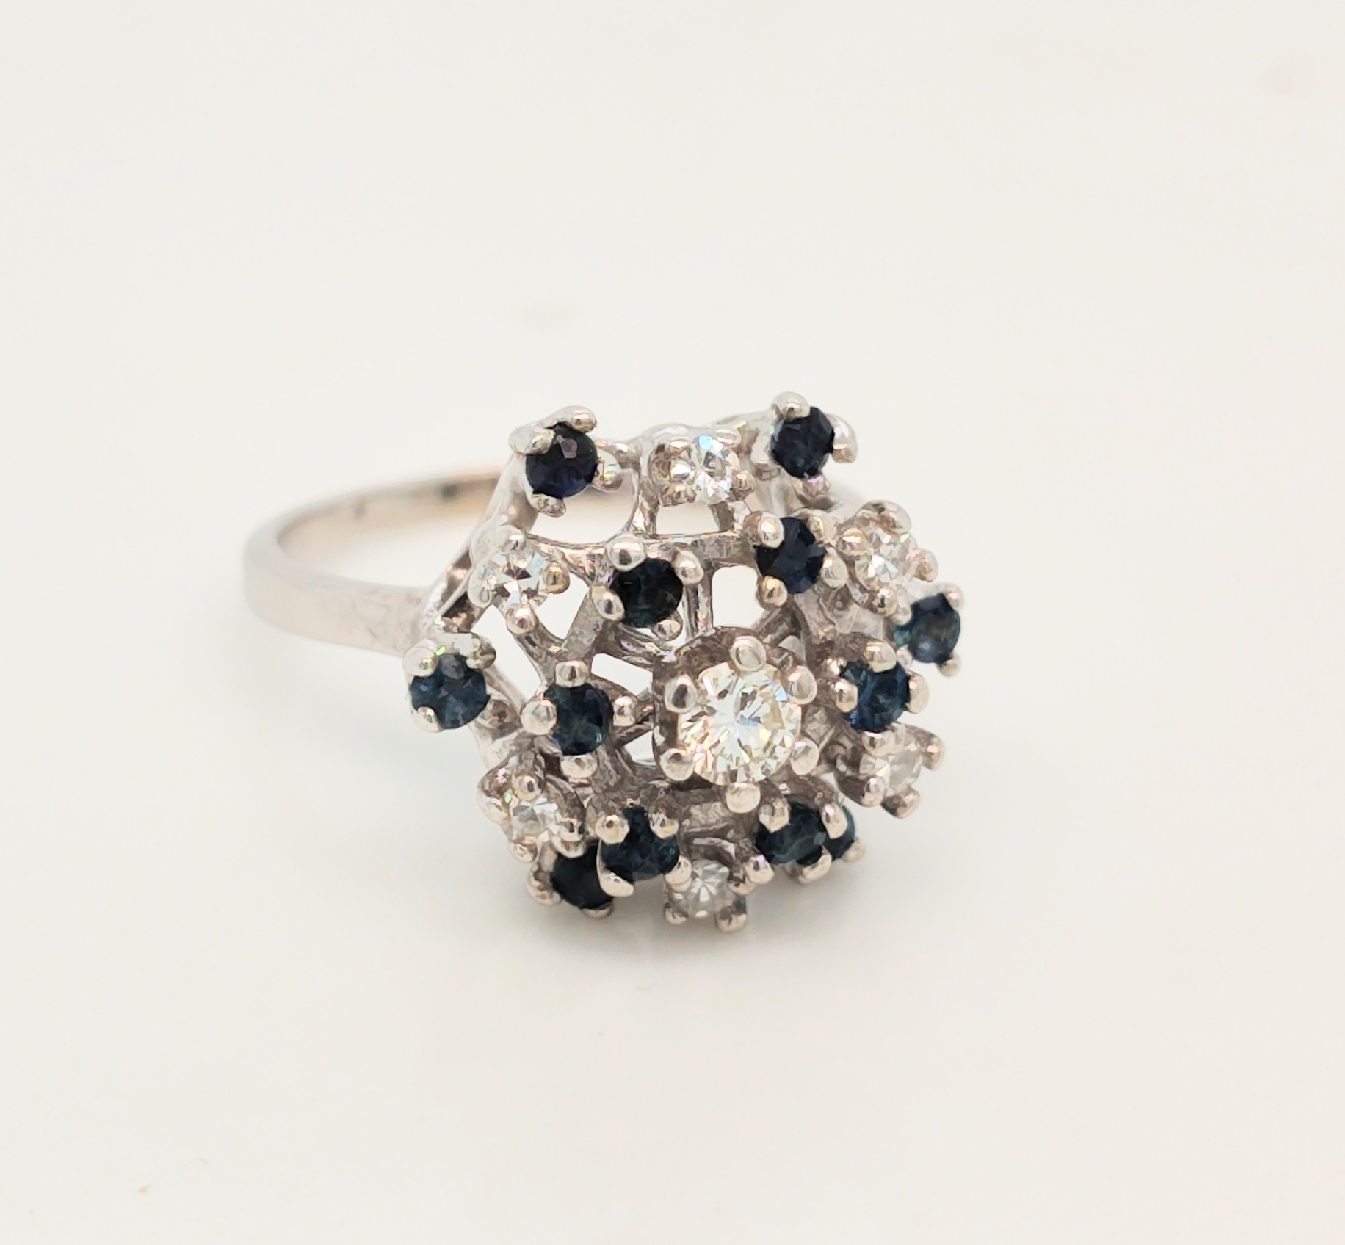 14K White Gold Sapphire and Diamond Ring Containing 12 Sapphires and 7 diamonds graded SI/K Size 5.5